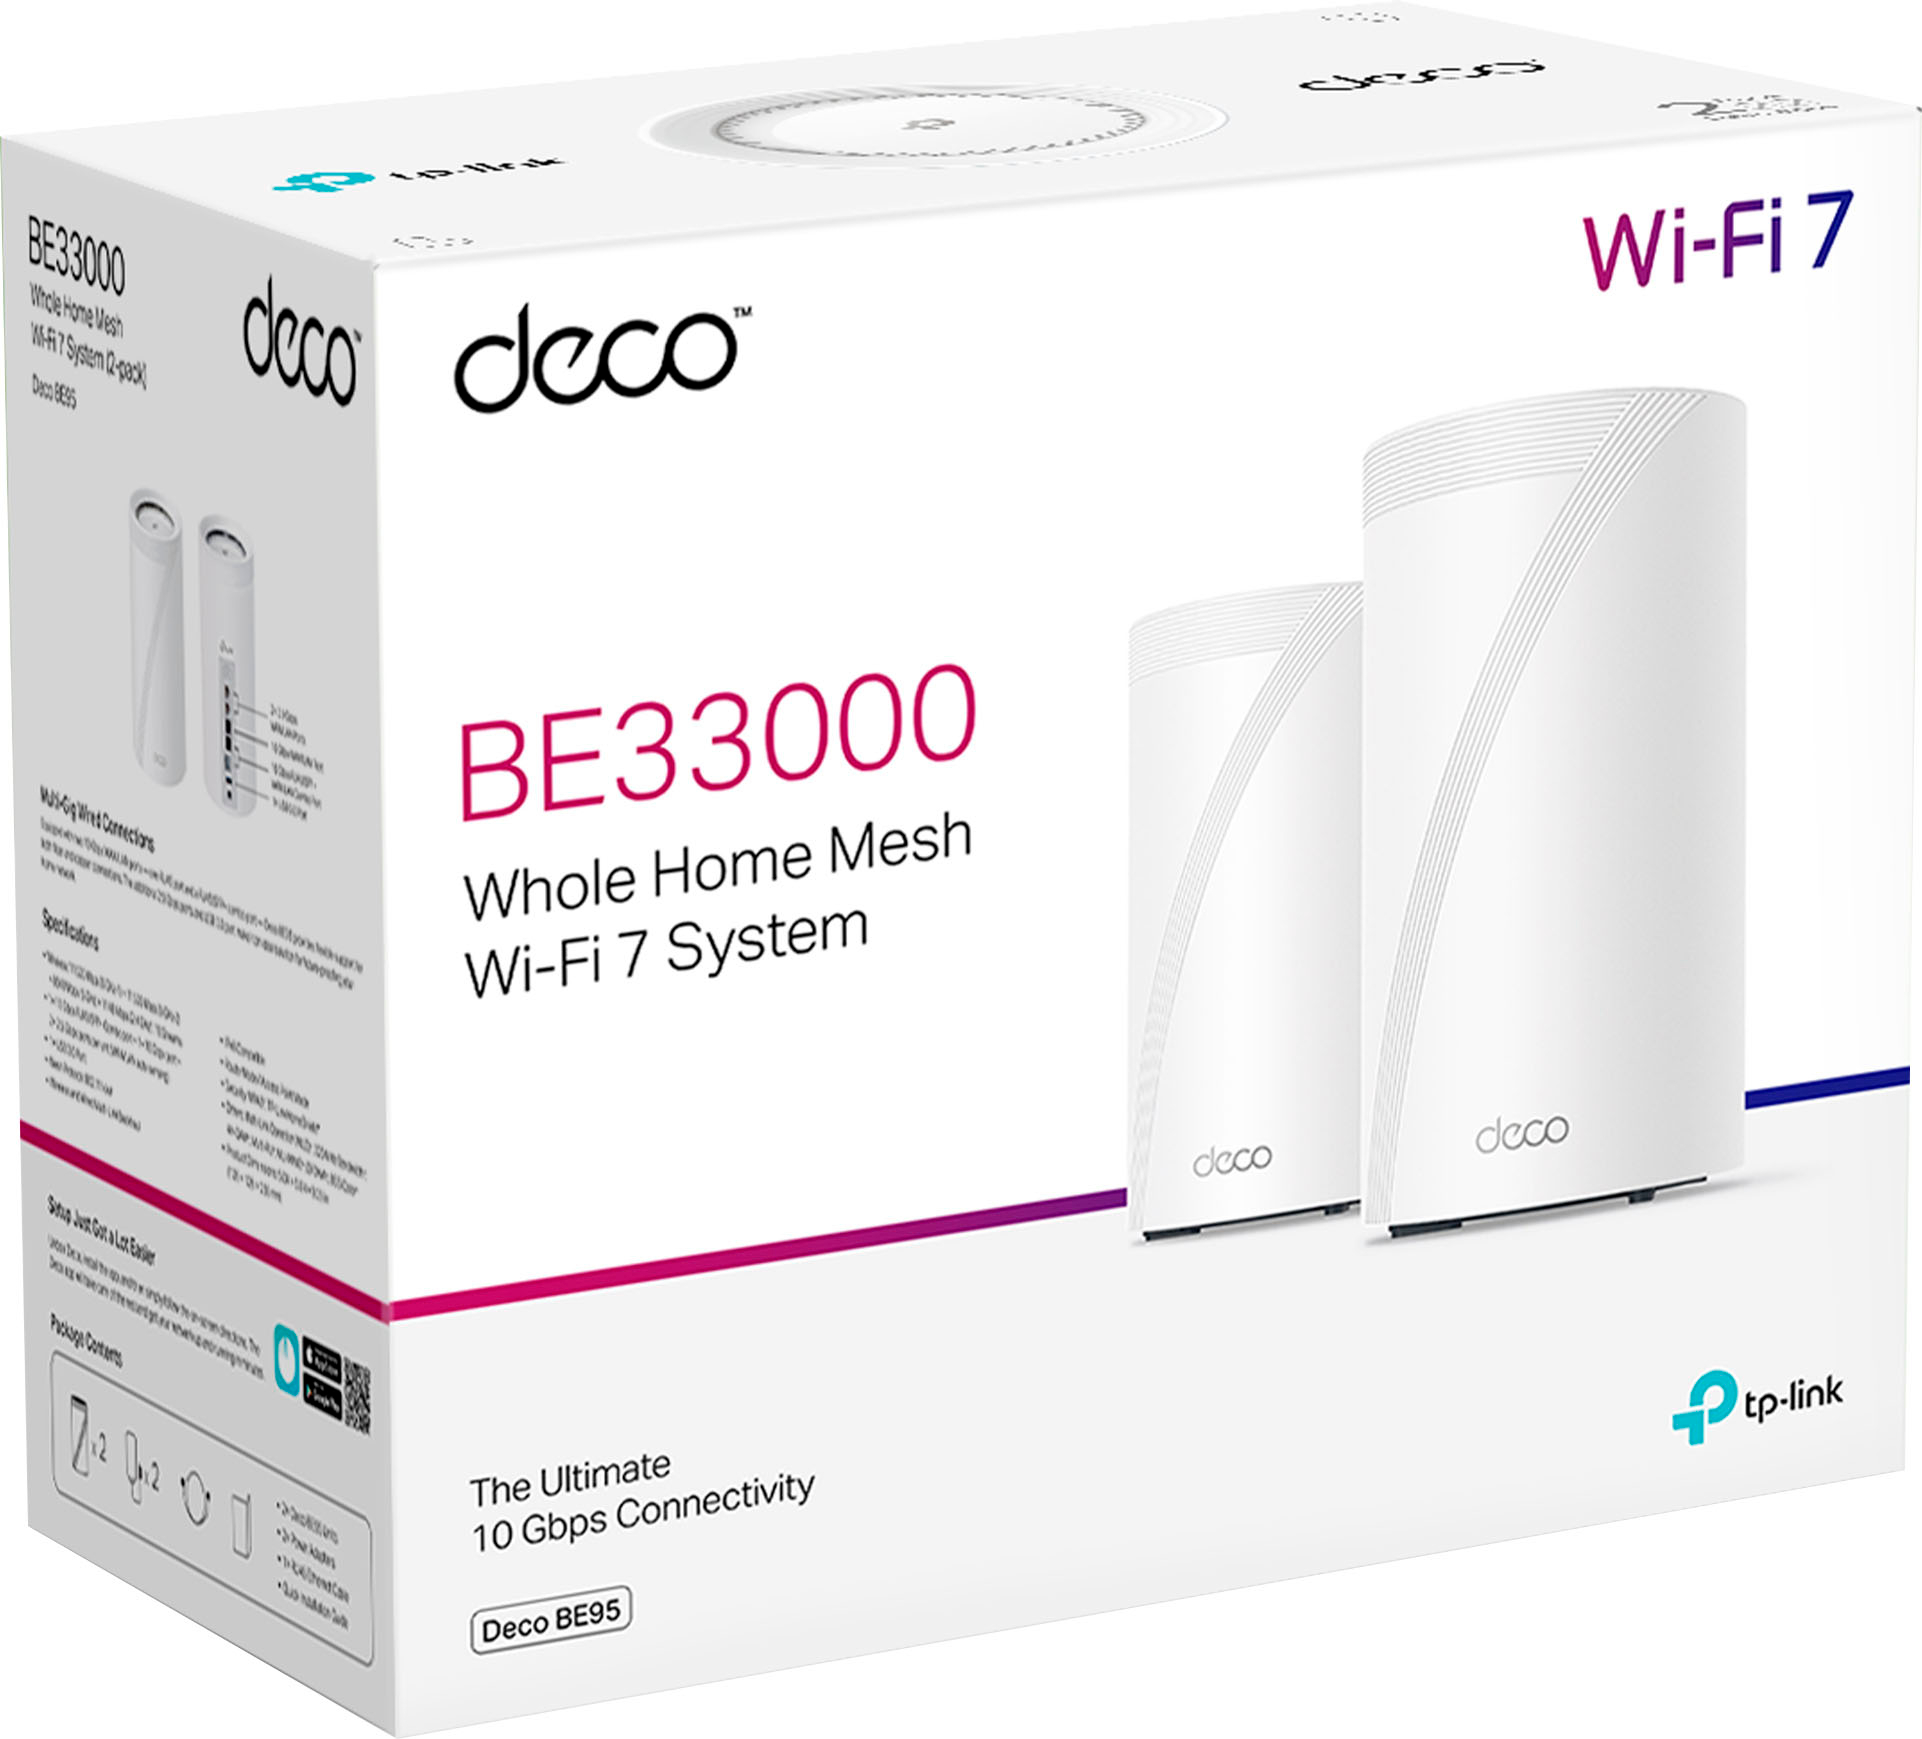  TP-Link Deco BE33000 Quad-Band WiFi 7 Mesh System